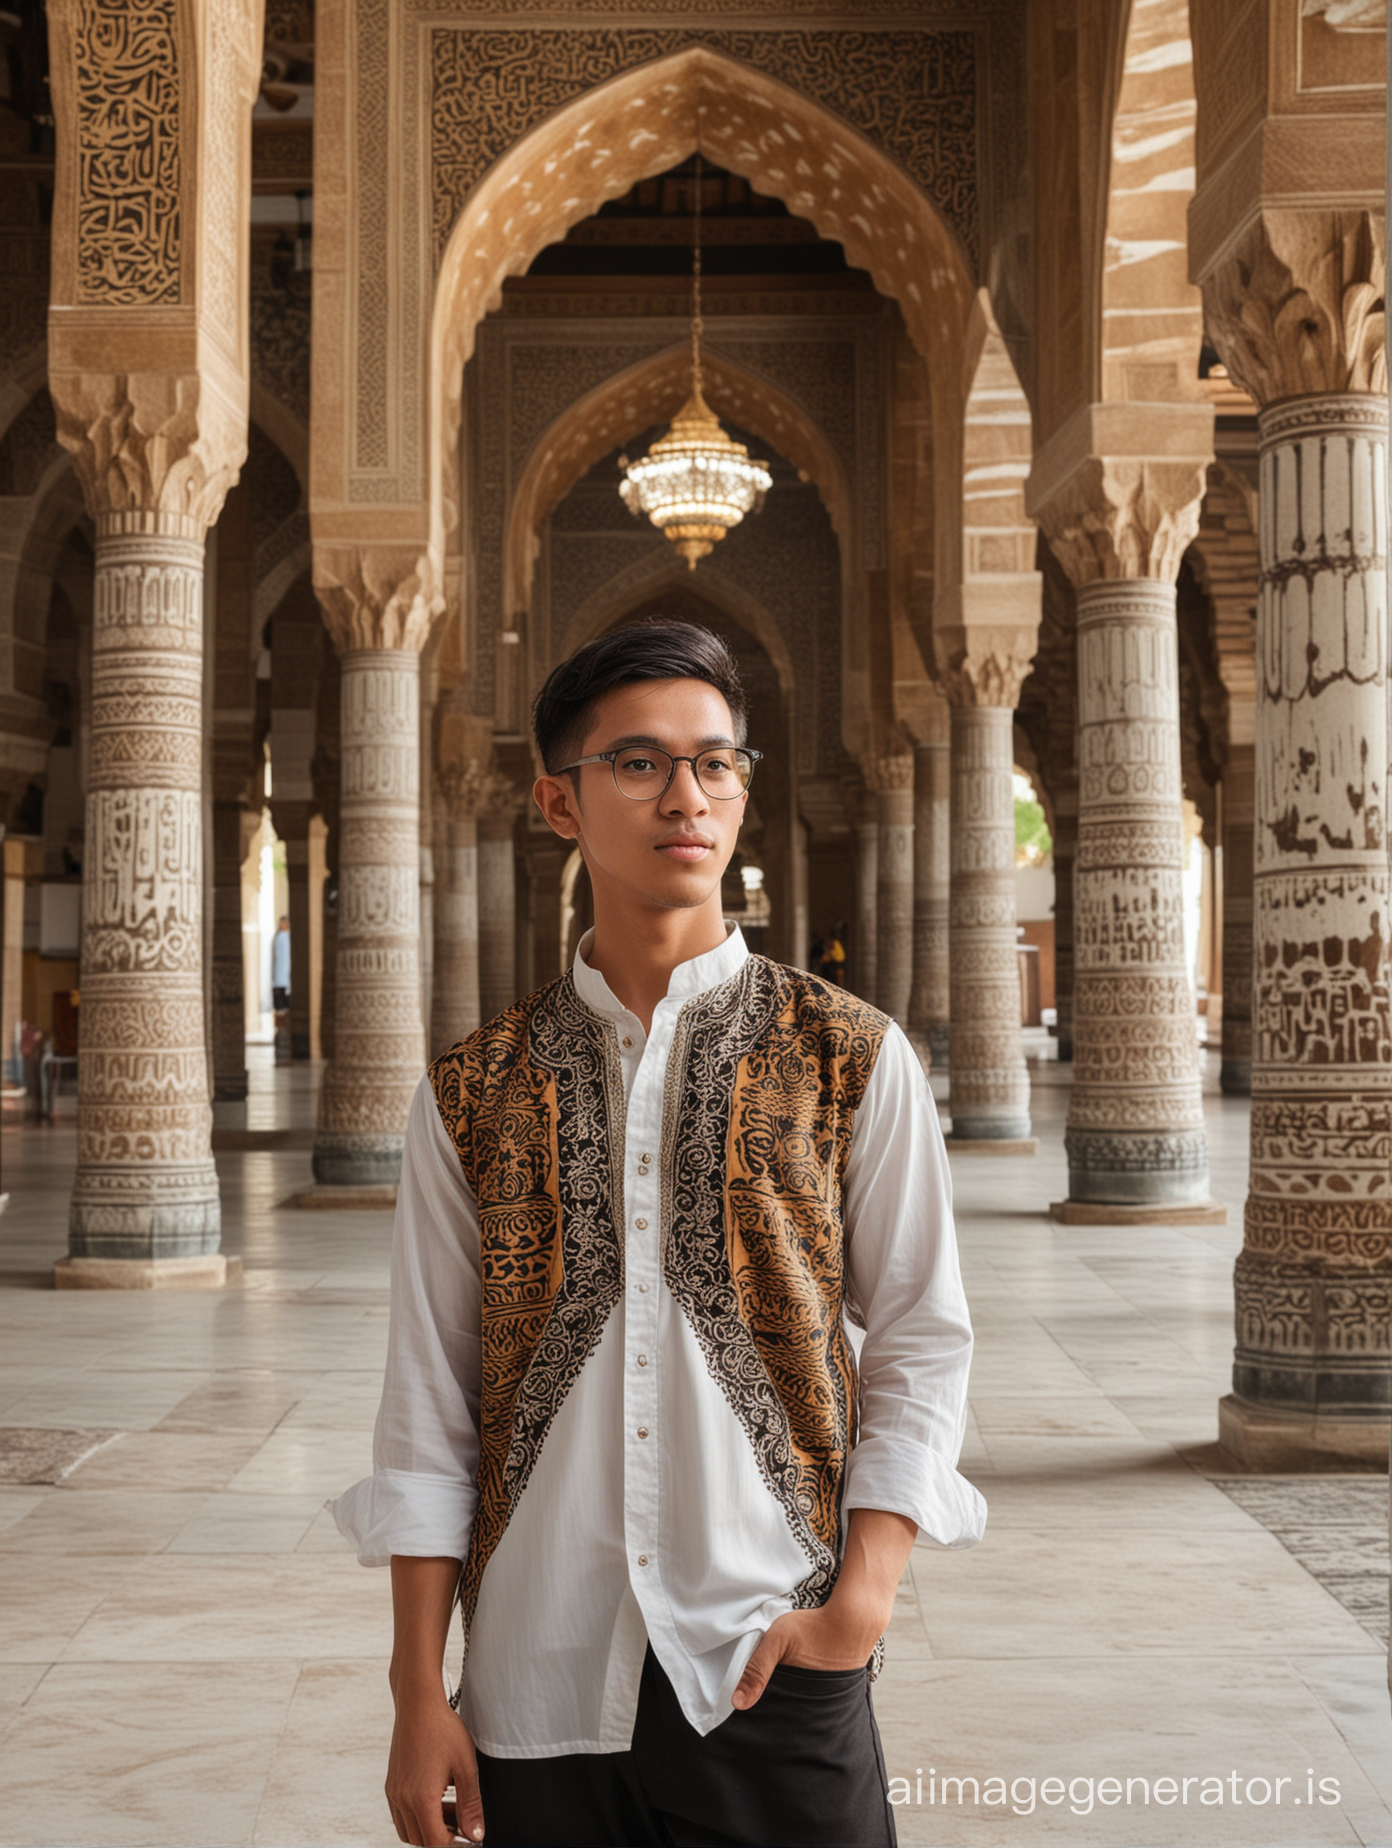 The Indonesian young man, wearing arabian style shirt, glasses, eye level, full body, facing to camera, mosque, tiger beside him